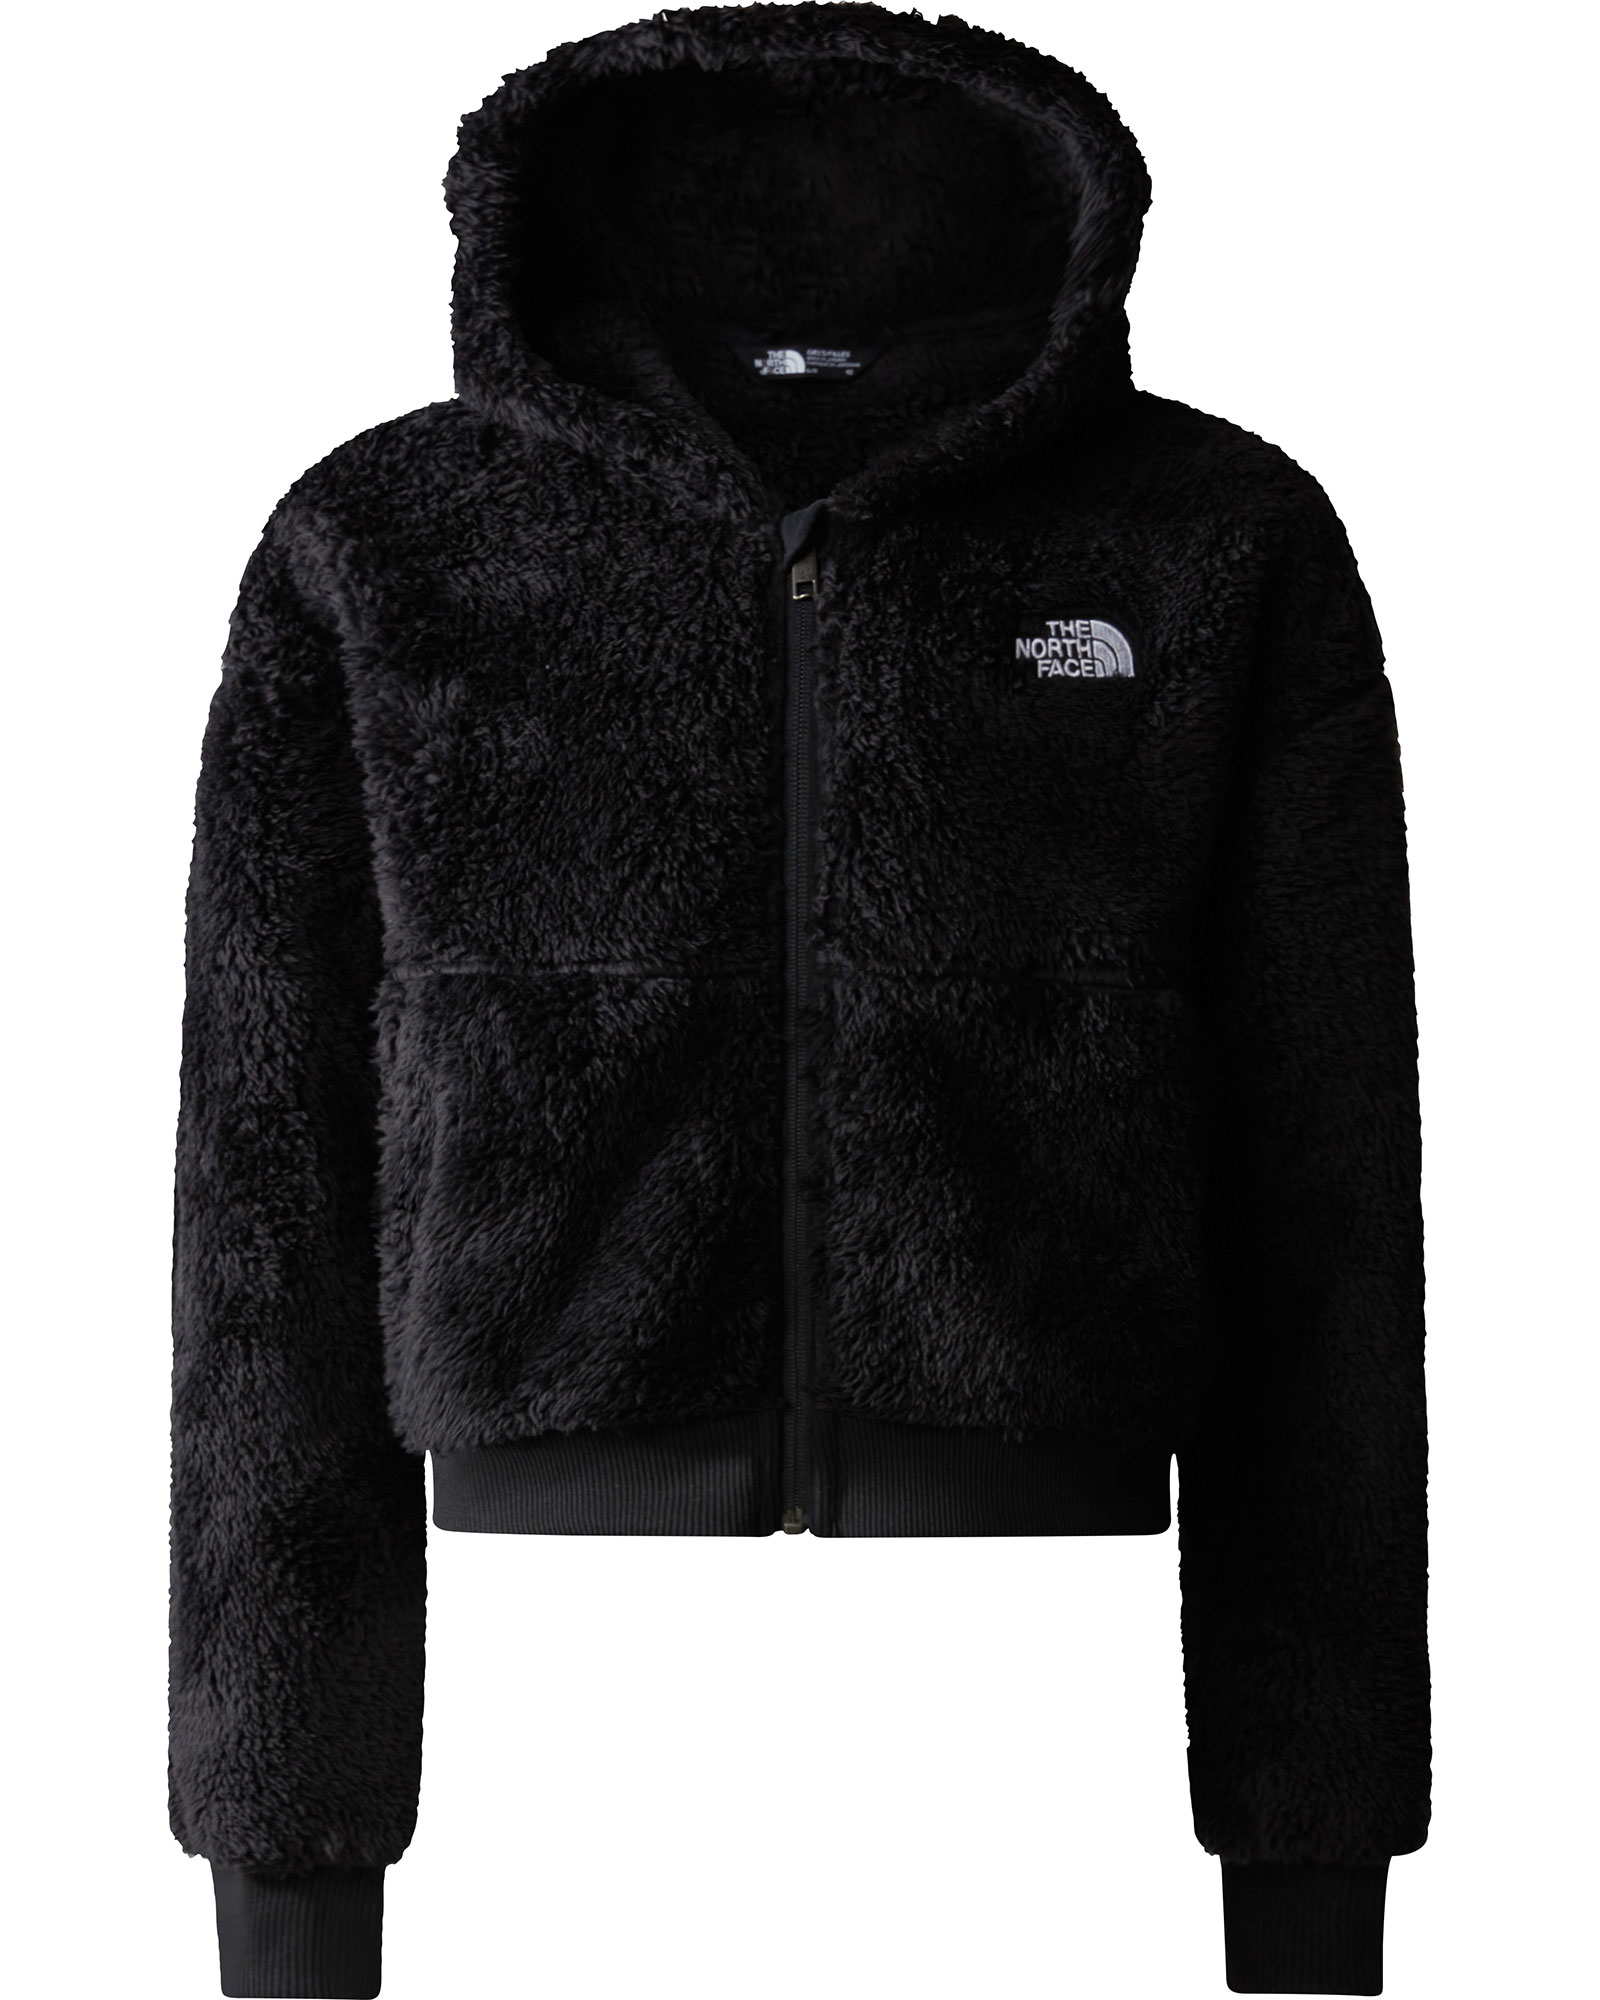 The North Face Girl’s Suave Oso FZ Hooded Jacket - TNF Black S